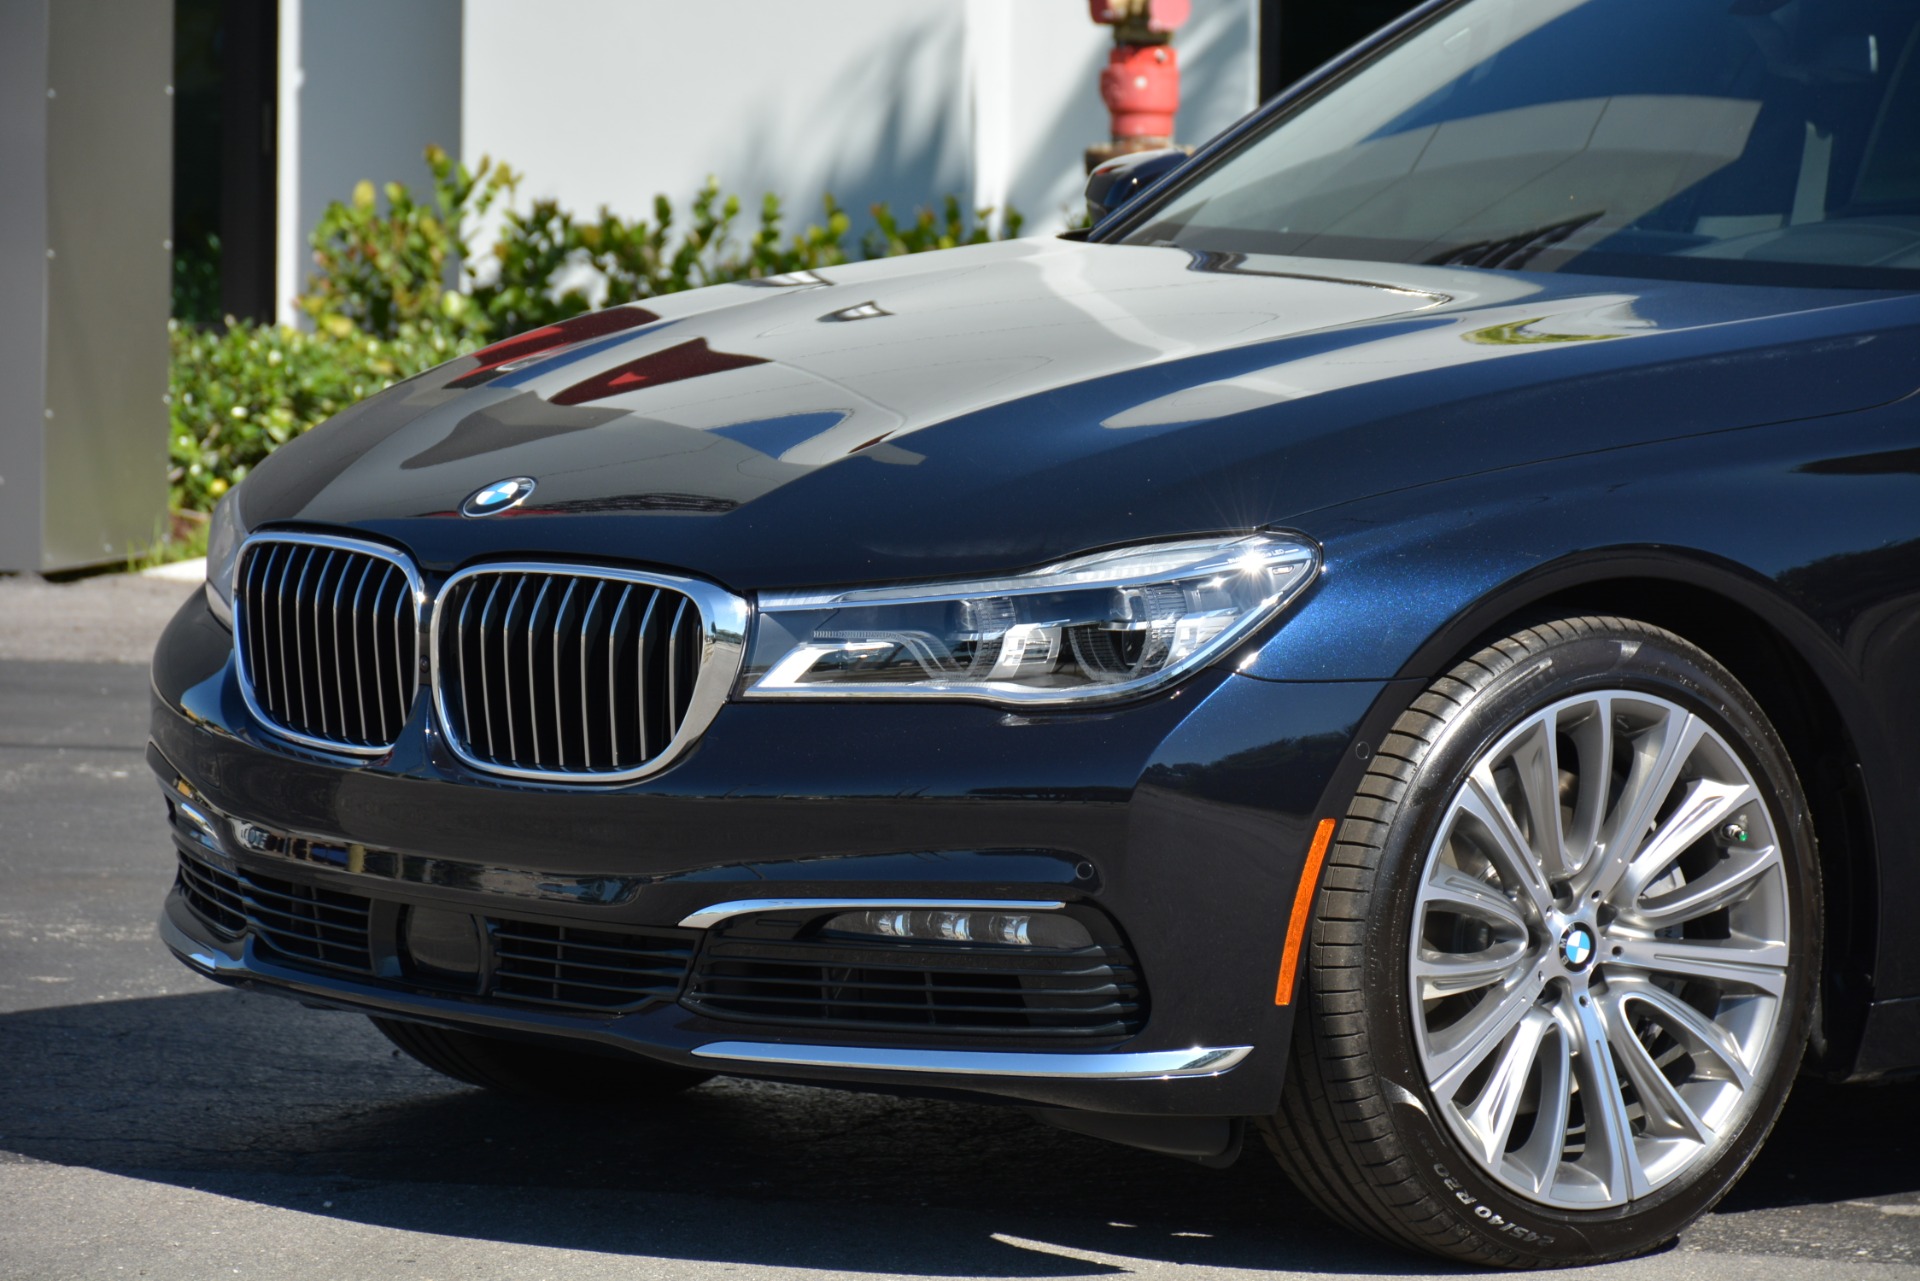 Used 2018 BMW 7 Series 750i For Sale ($94,900) | Marino Performance ...
